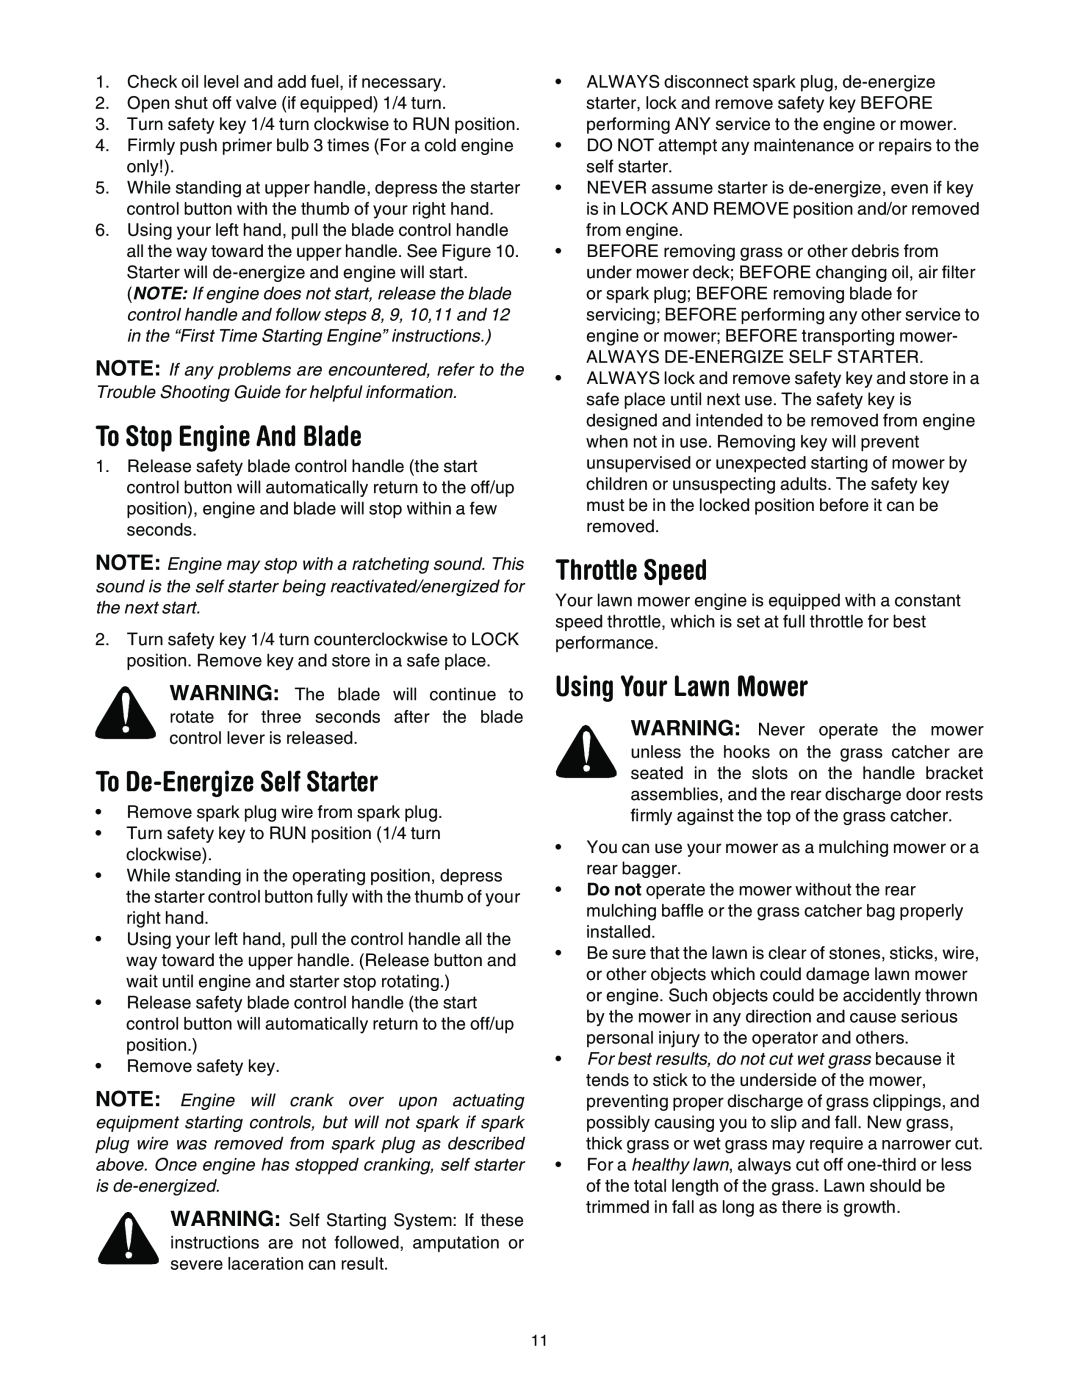 Bolens 589 manual To Stop Engine And Blade, To De-EnergizeSelf Starter, Throttle Speed, Using Your Lawn Mower 